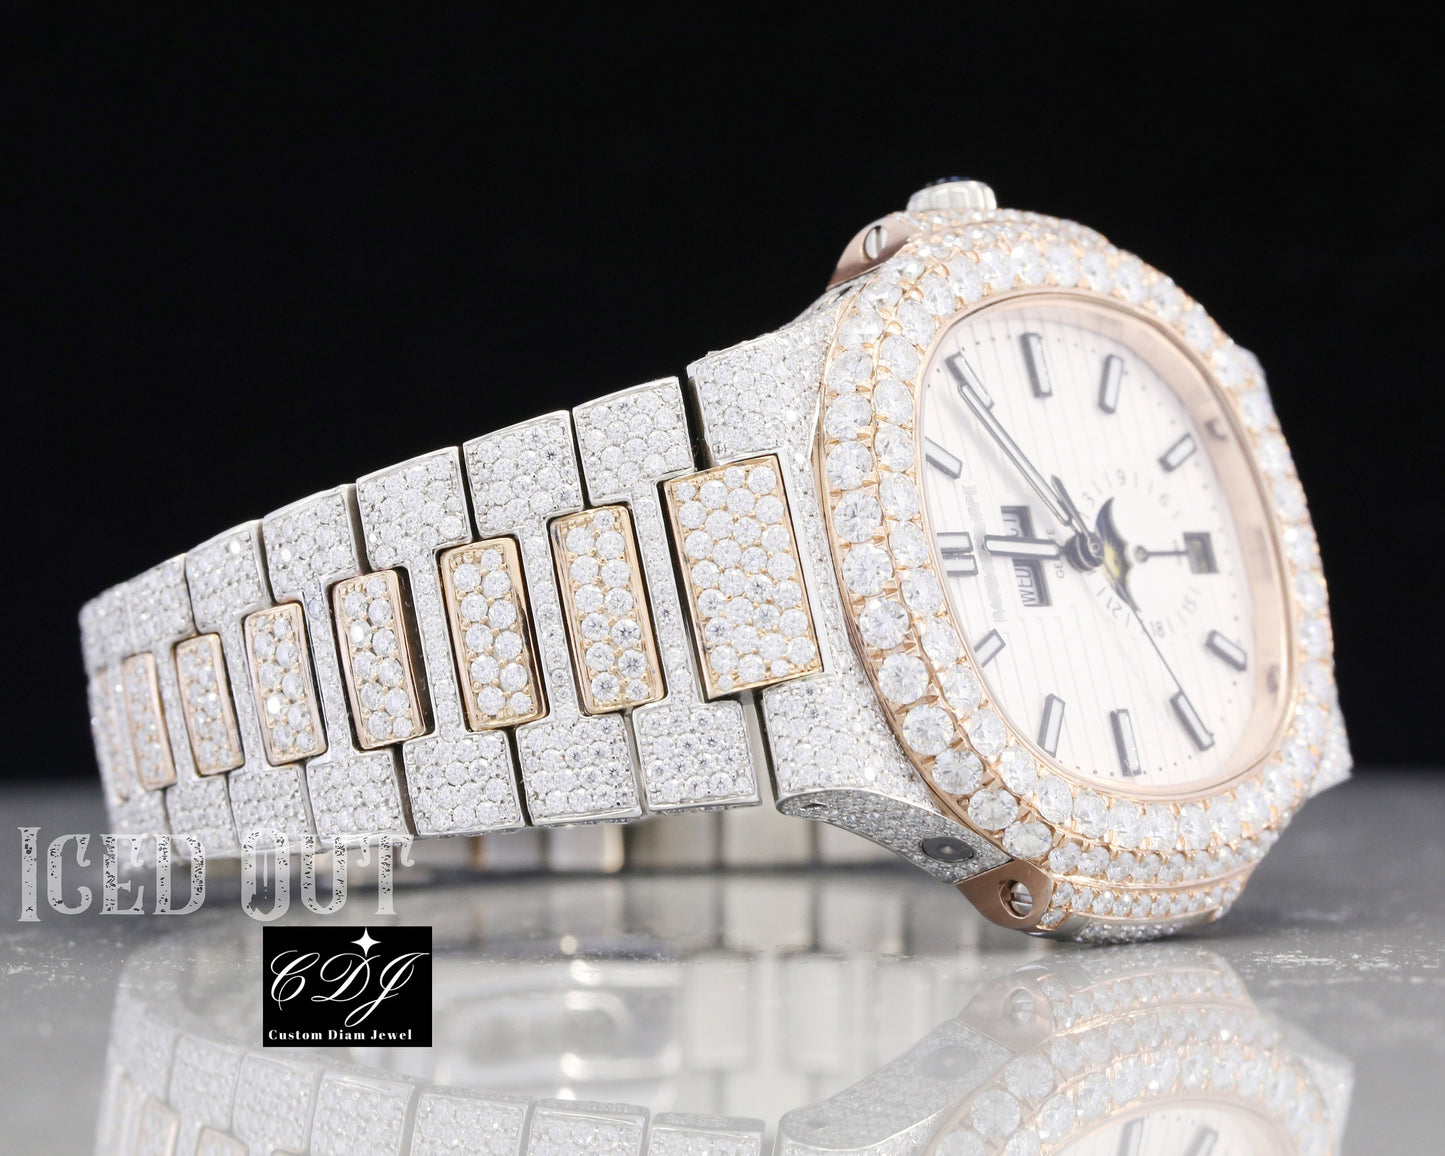 Two Tone Natural Diamond Watch Fully Iced Out Diamond Watches Customized Manufacture Watches For Men Top Branded Wrist Watches Mechanical Automatic